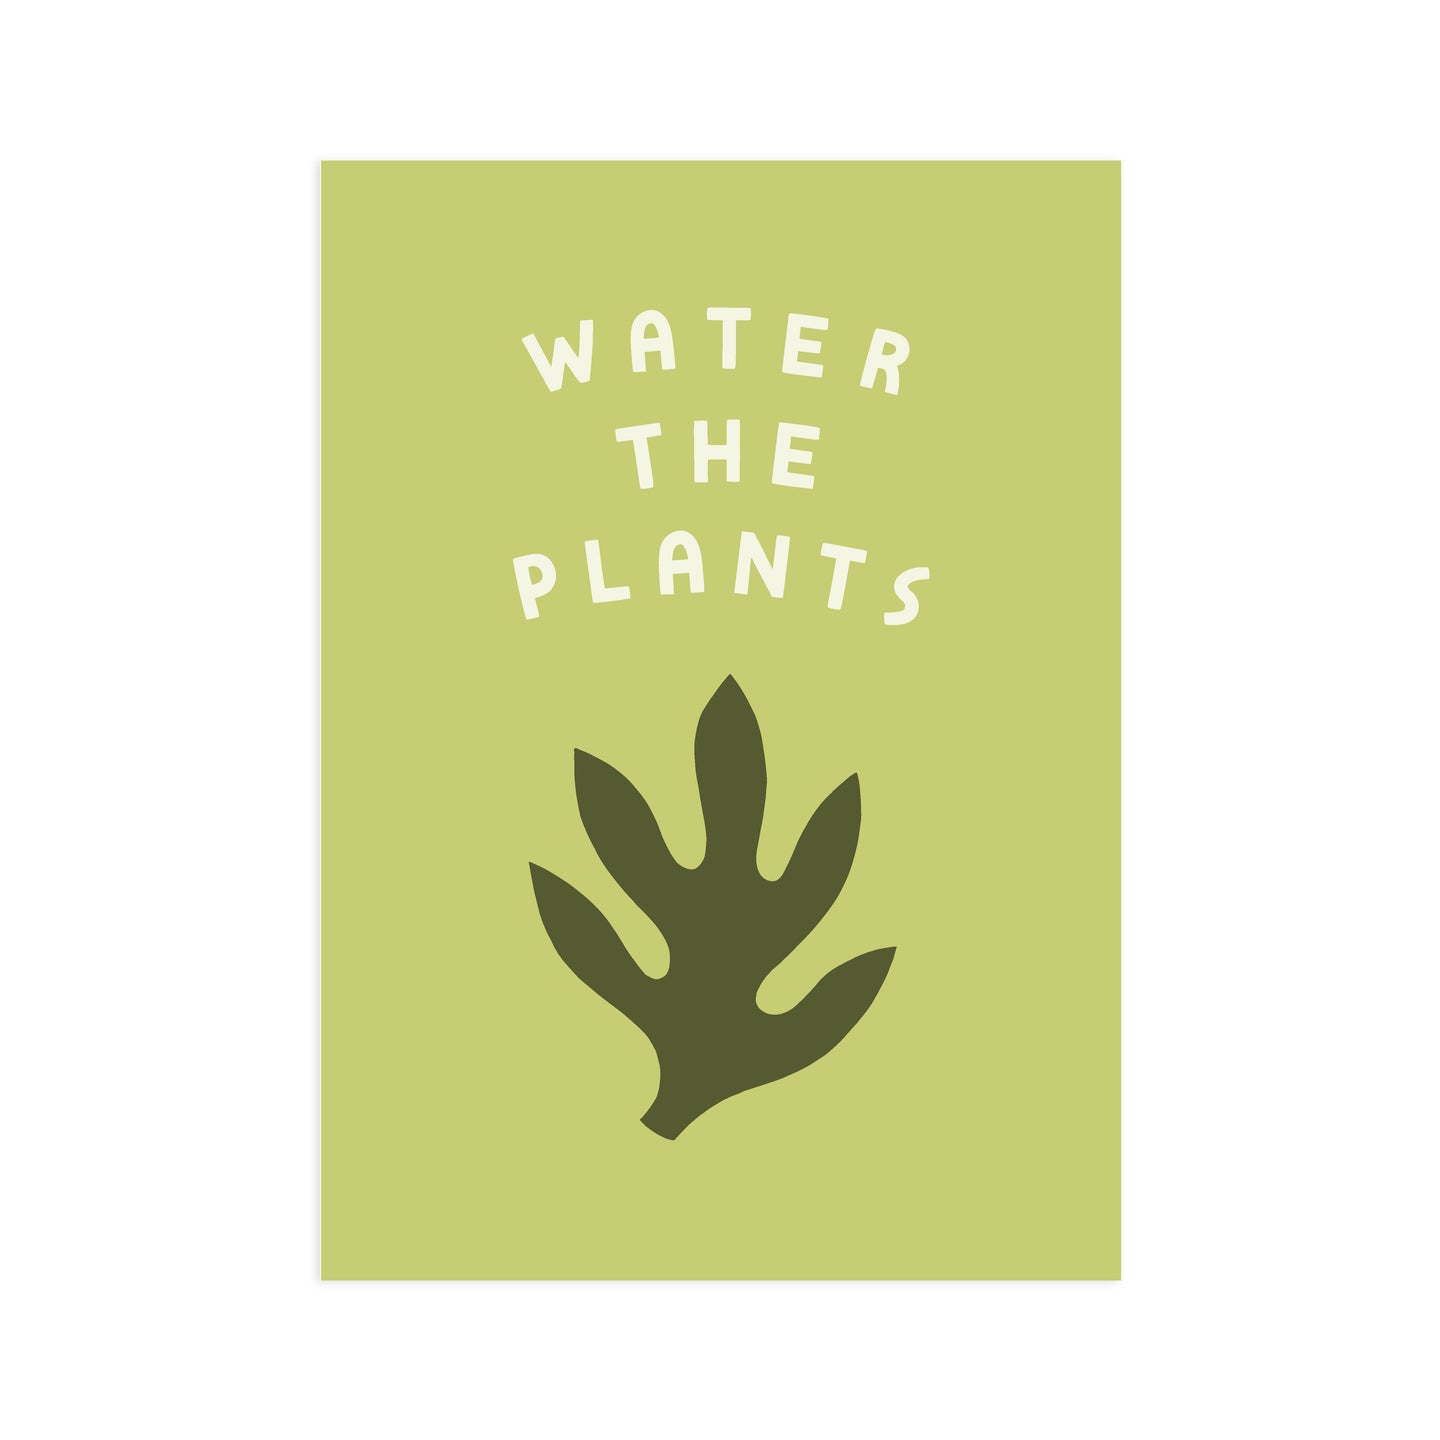 Worthwhile Paper - Water the Plants 5x7 Screen Print